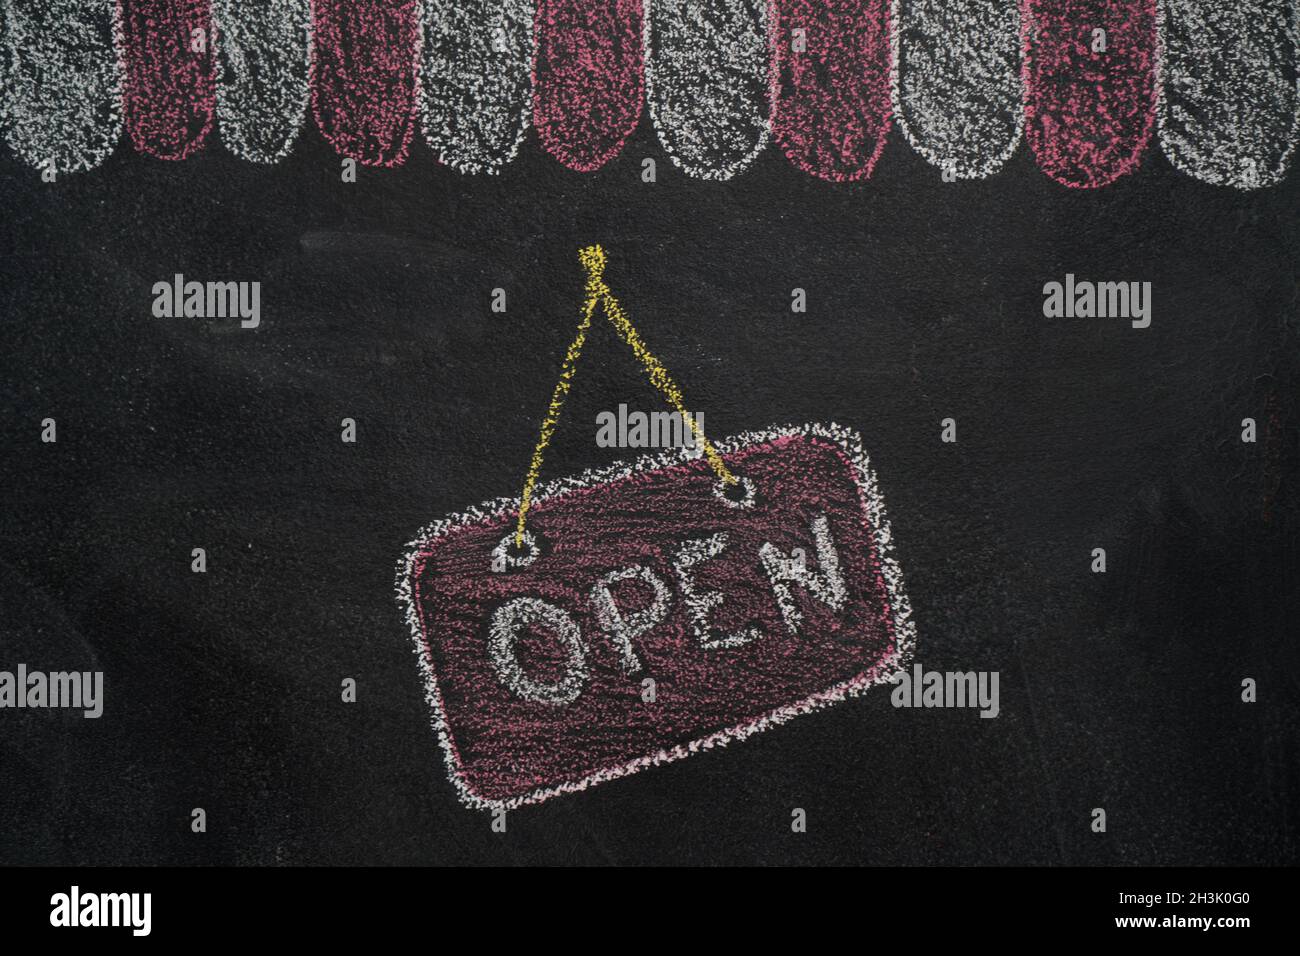 Shop cafe roof with open sign on chalkboard Stock Photo